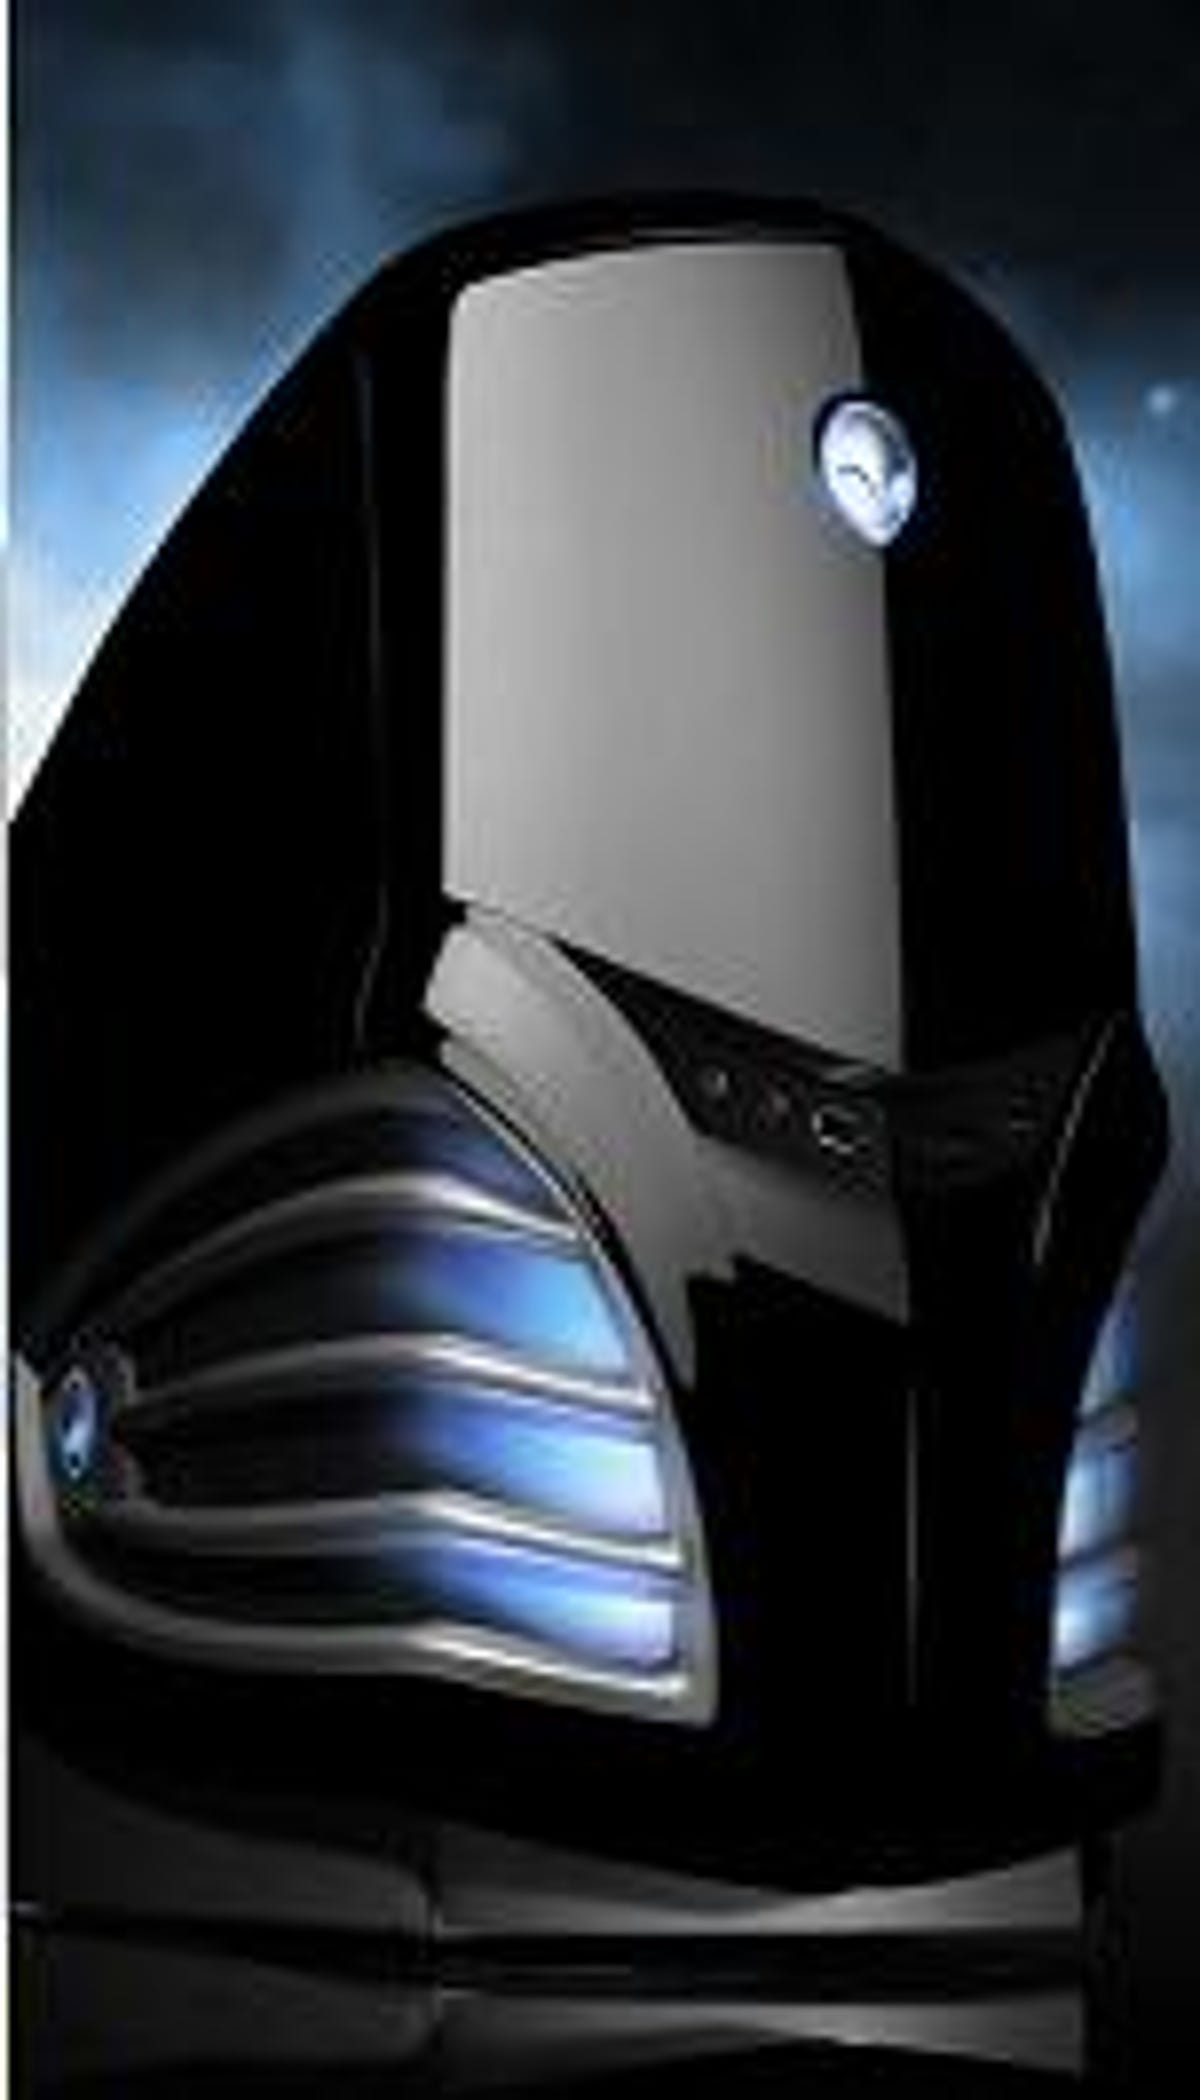 Alienware will ship a system with 4GB of memory, two ATI graphics chips, and a quad-core AMD processor for under $1,700, dirt cheap in the gaming PC world.